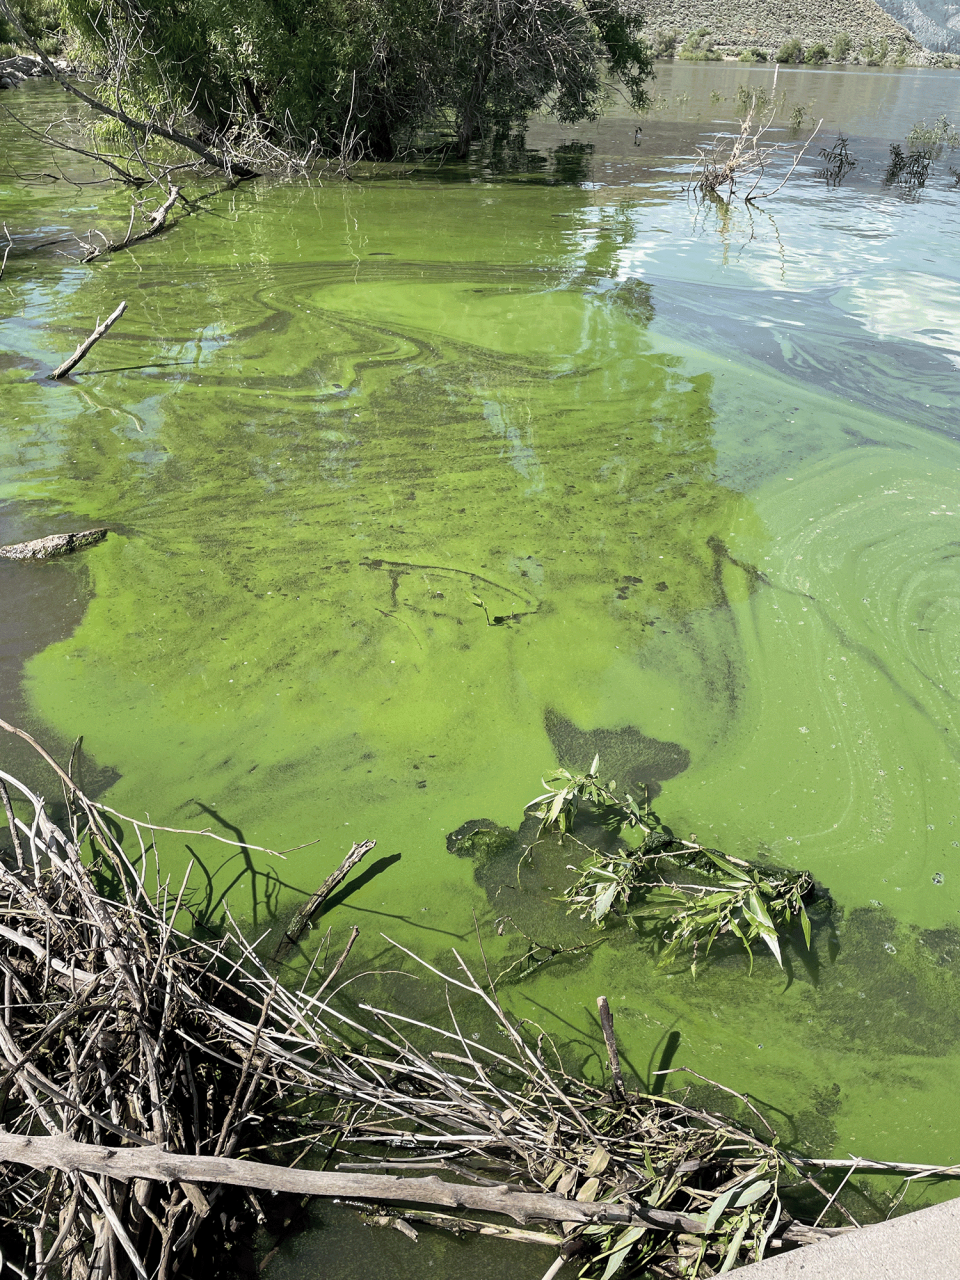 An example of a Harmful Algal Bloom in Washoe Lake State Park in Nevada.